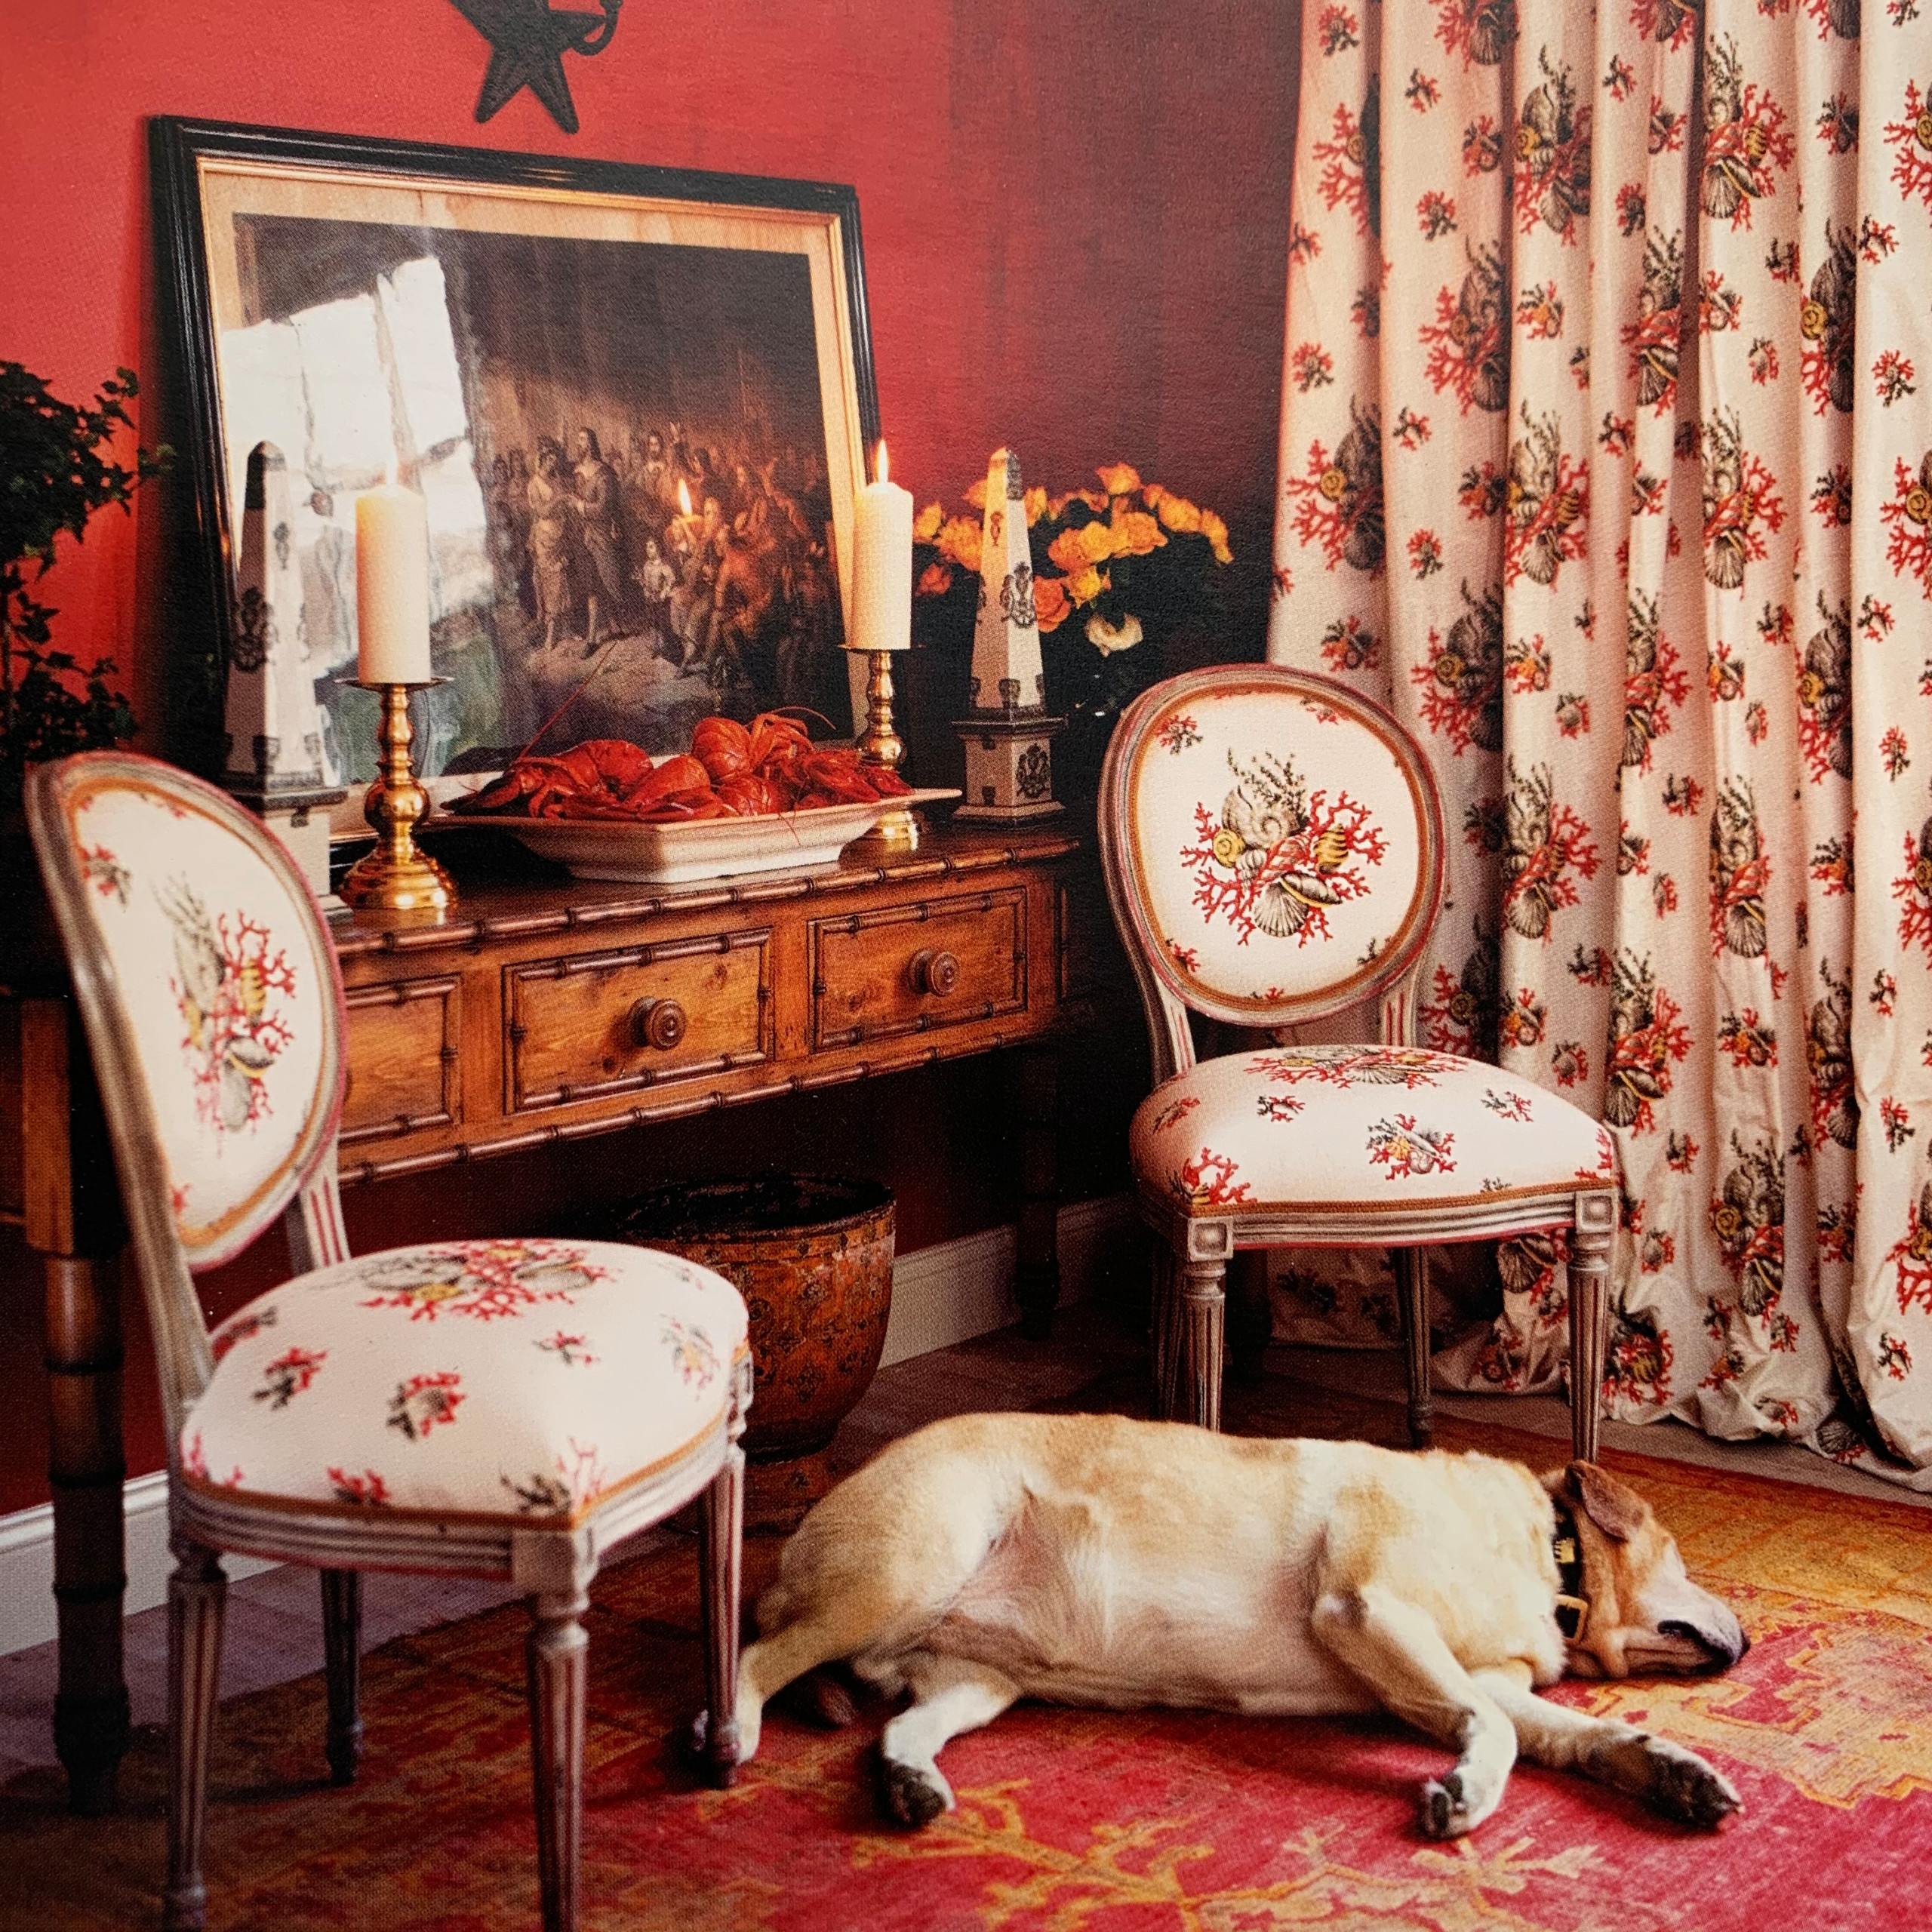 Louis XVI Chairs w/matching draperies. One of my favorites!